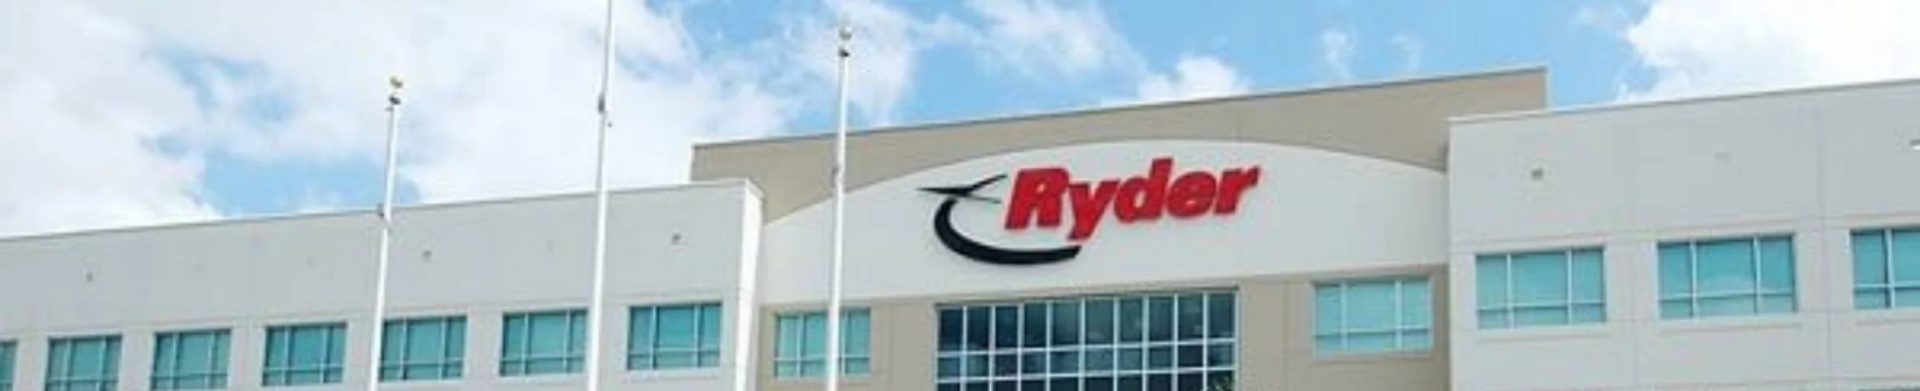 Ryder headquarters in the daytime